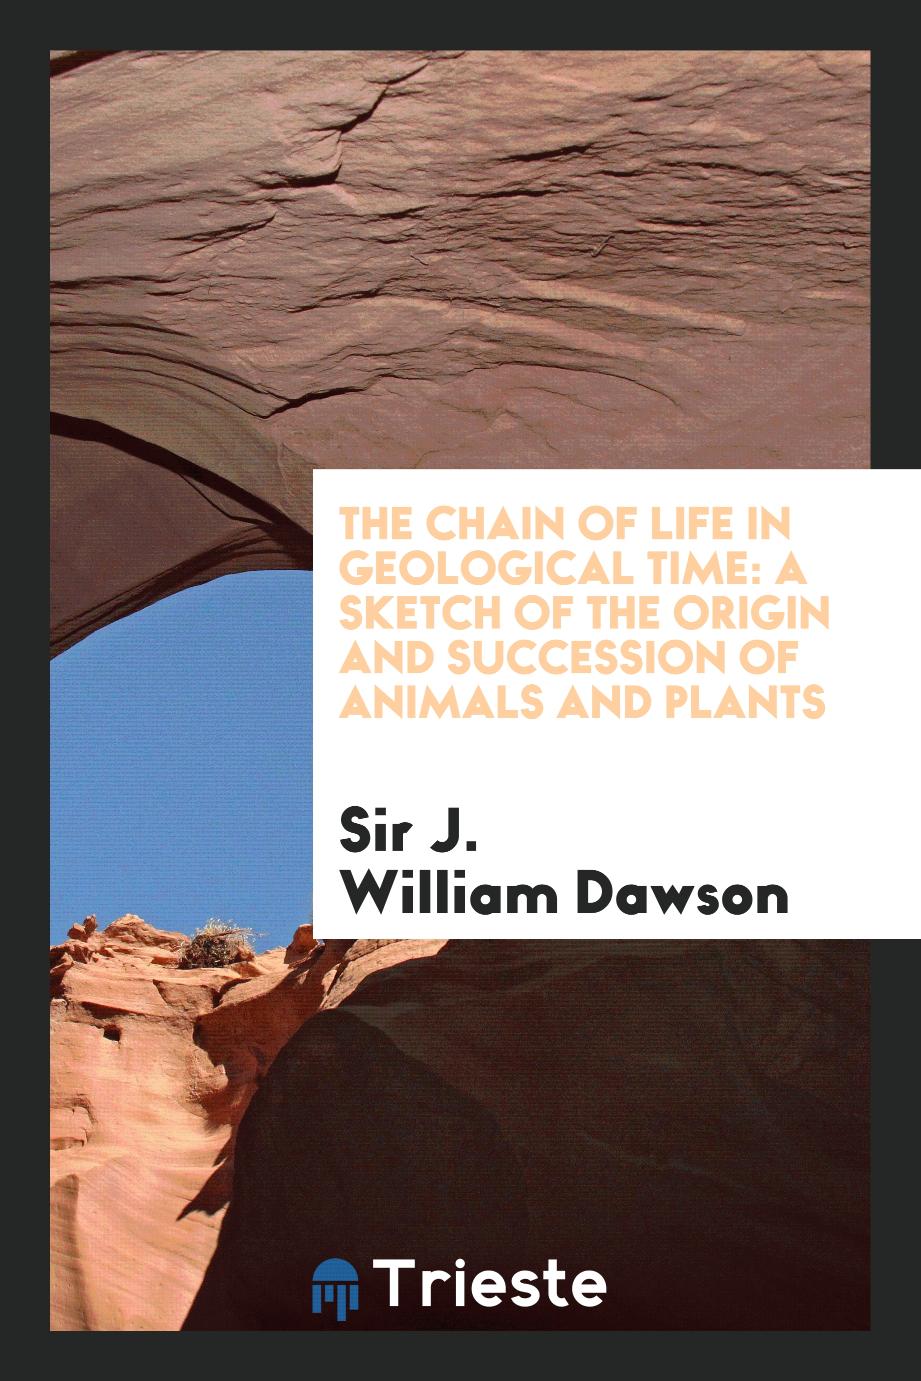 The Chain of Life in Geological Time: A Sketch of the Origin and Succession of Animals and Plants